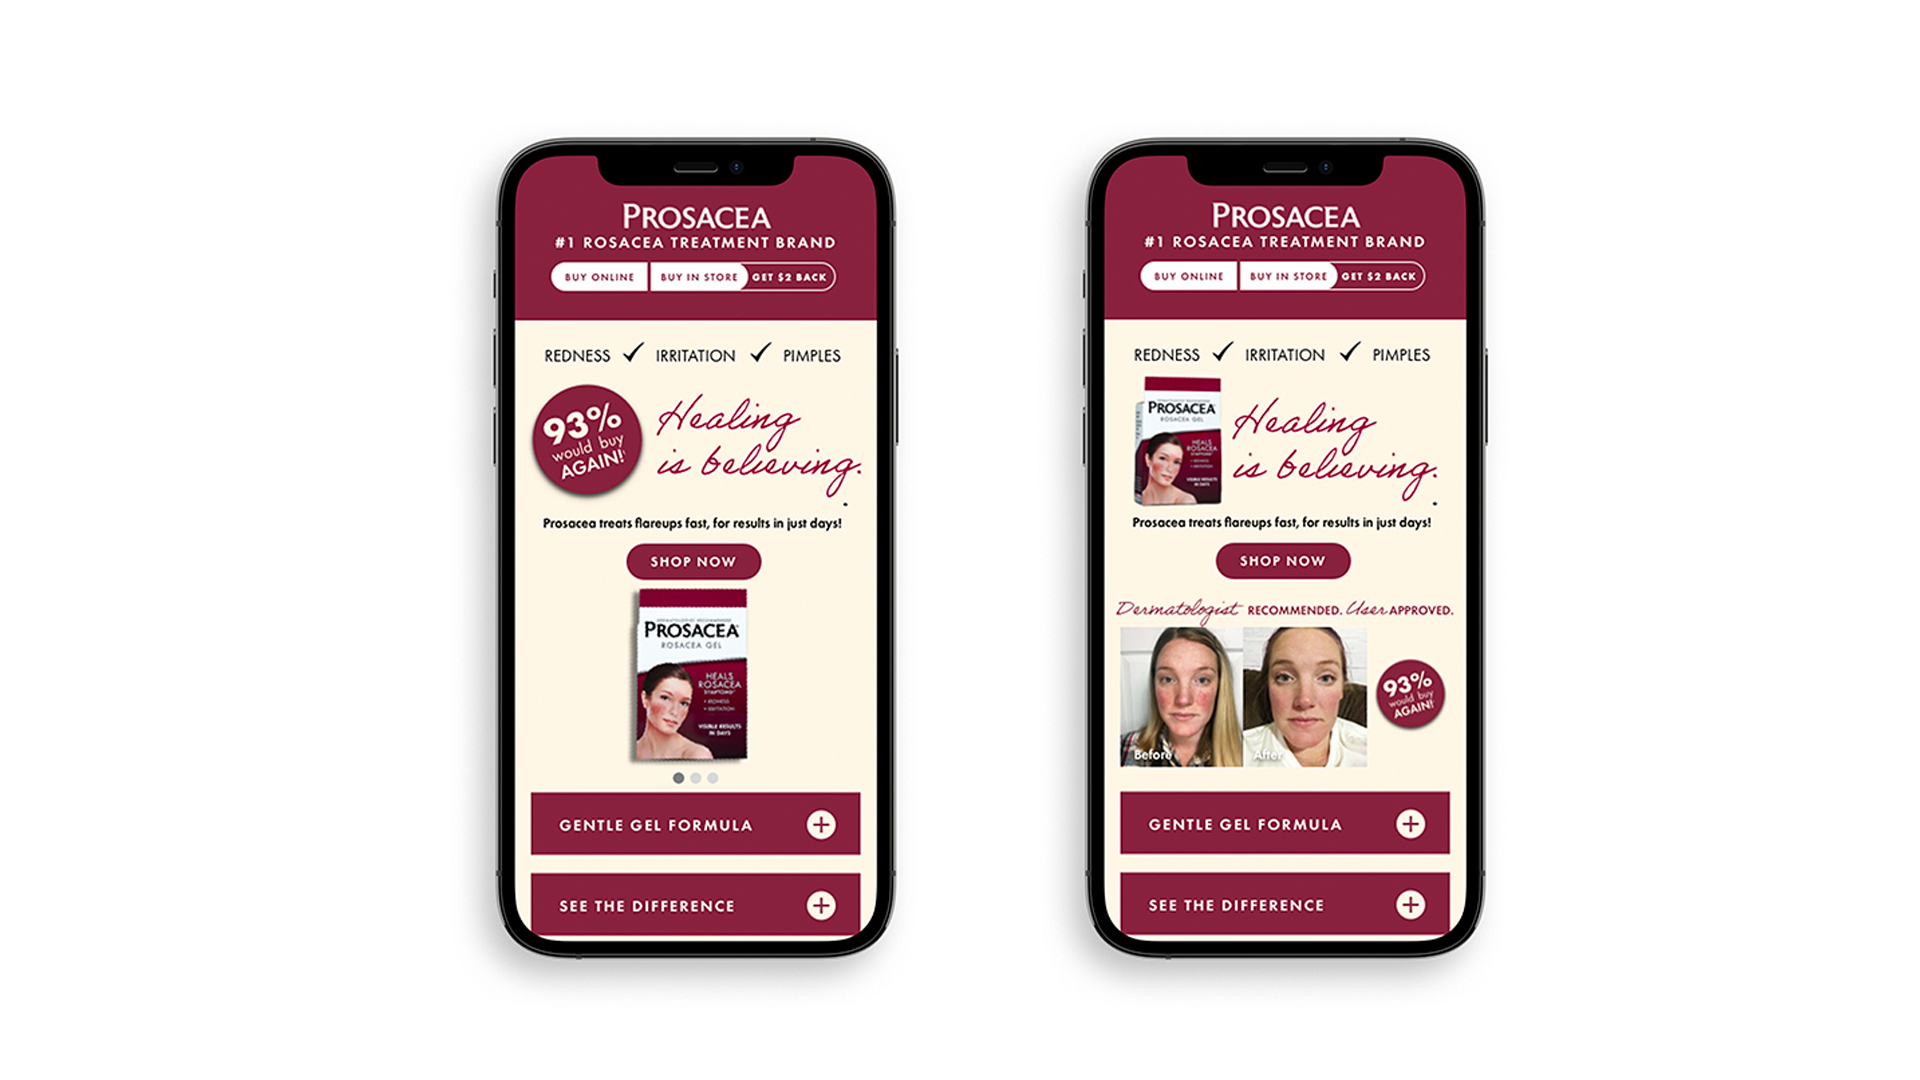 Alva Amco Pharmacal - digital campaign for prosacea - landing pages on mobile